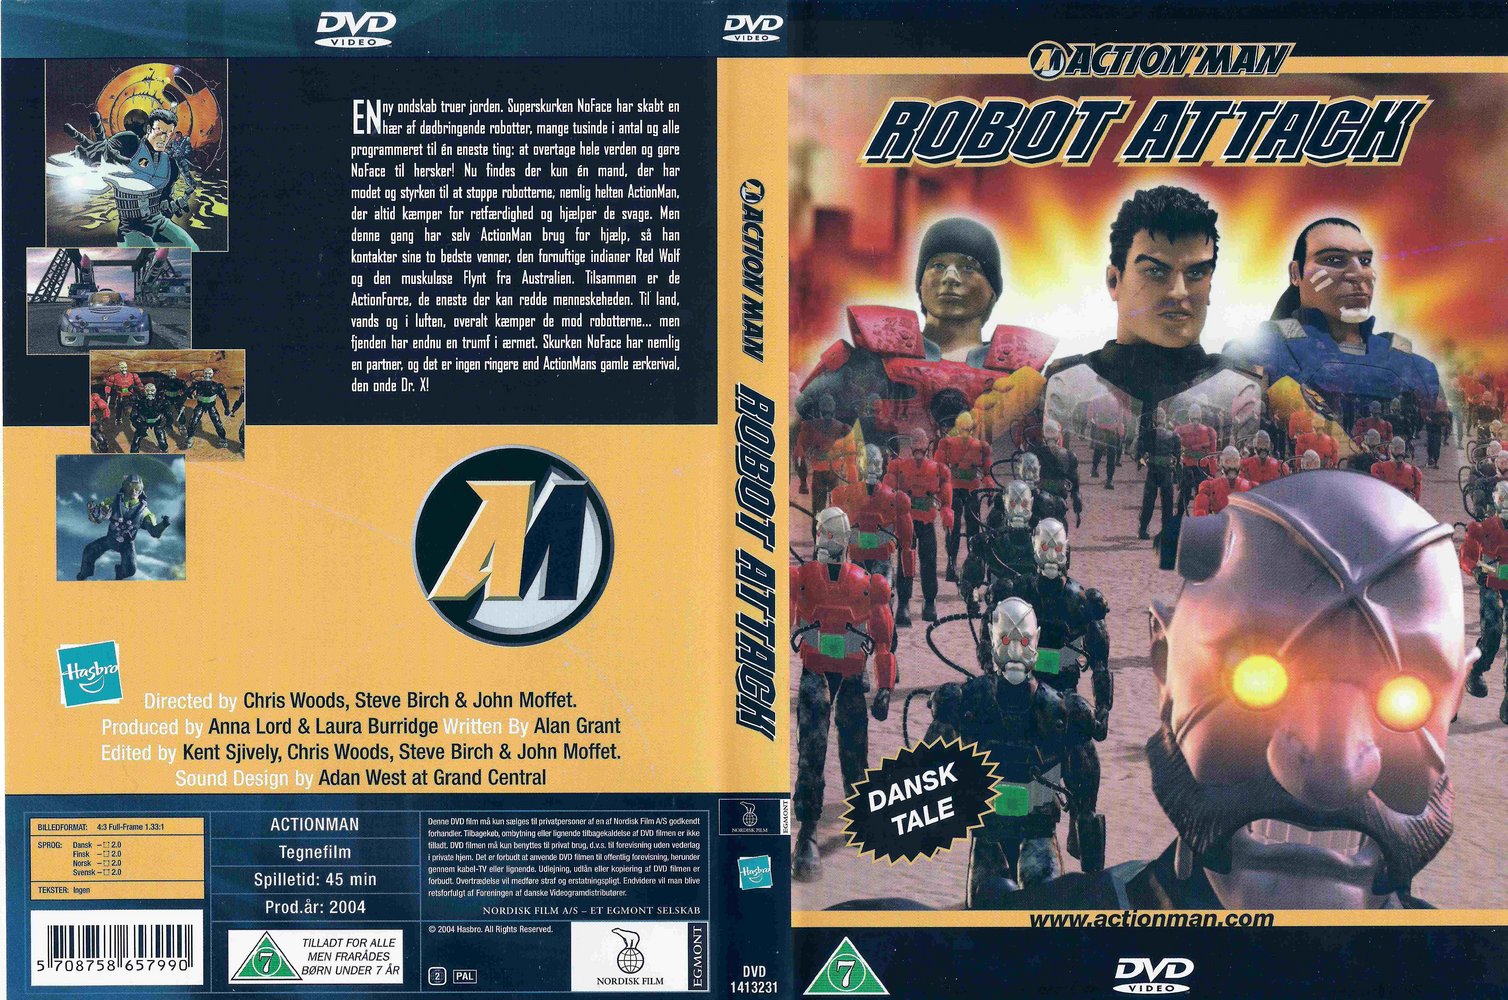 Jaquette DVD Action Man Robot Attack Zone 1